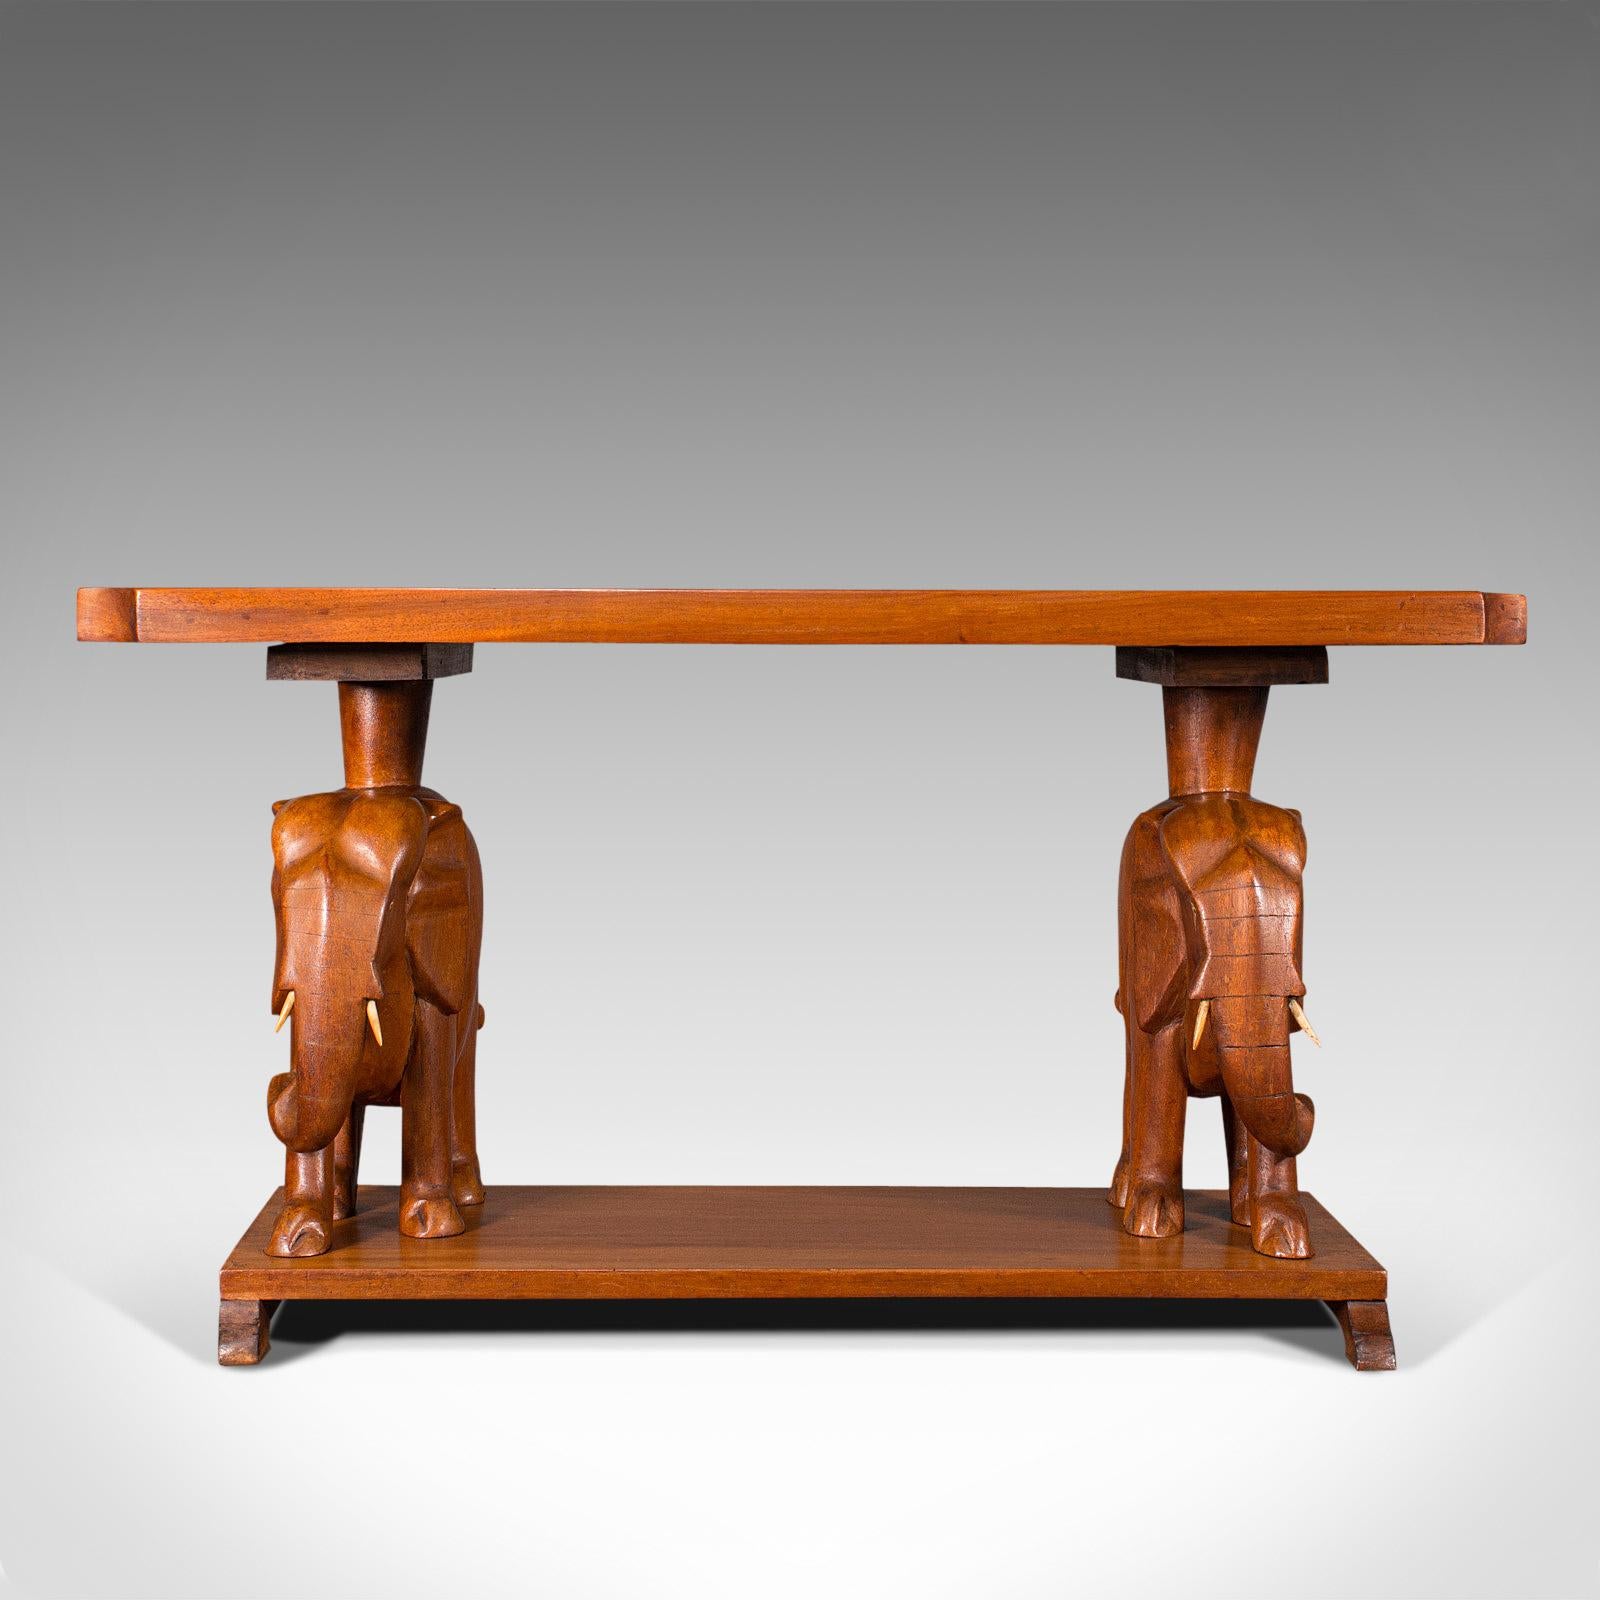 This is a vintage decorative coffee table. An Asian, mahogany side table with elephant figures, dating to the late Art Deco period, circa 1940.

Offering great character and rich colour for the living room
Displays a desirable aged patina and in